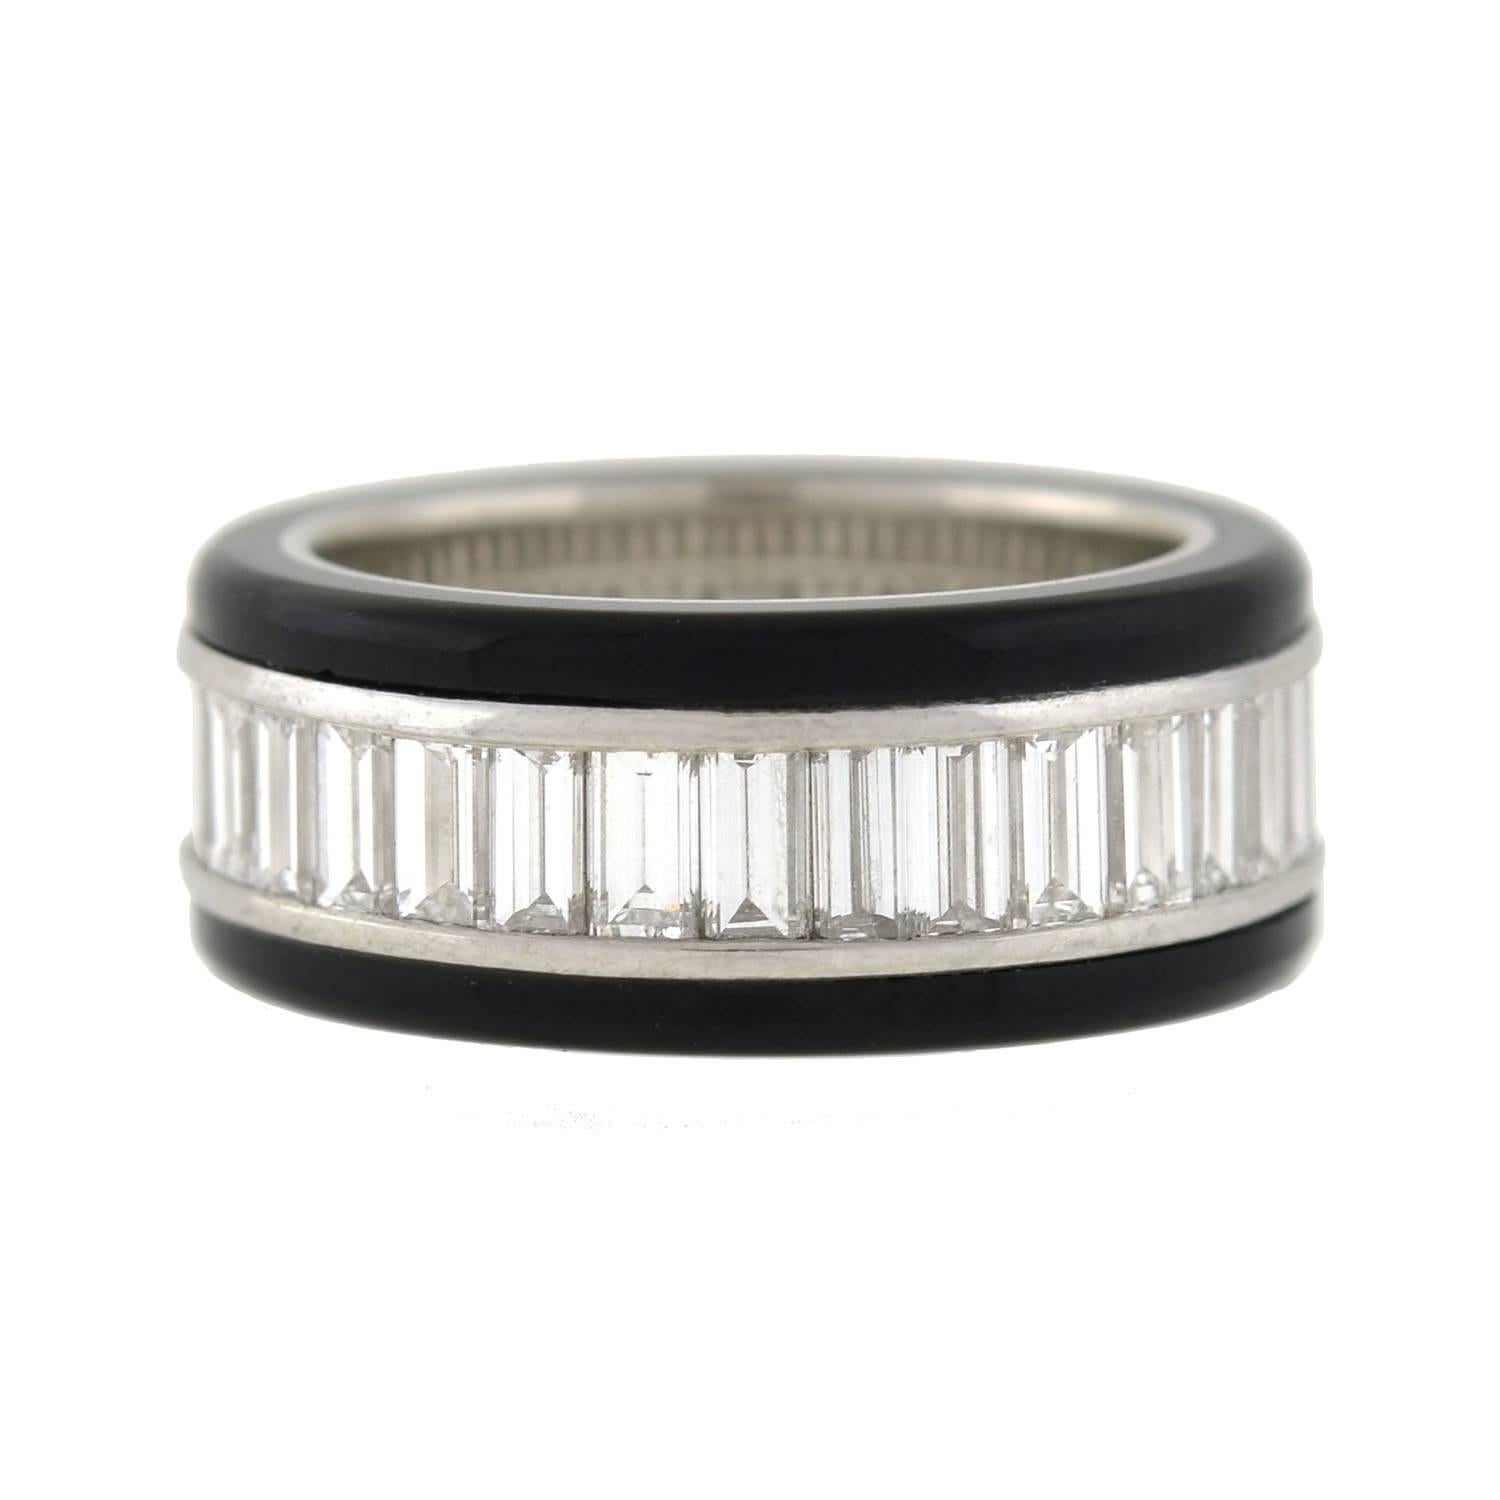 This outstanding estate ring is quite a beautiful and unusual piece! Crafted in platinum, the stylish design features a continuous row of baguette diamonds, which are framed by two bands of carved onyx on either side. The channel set diamonds weigh